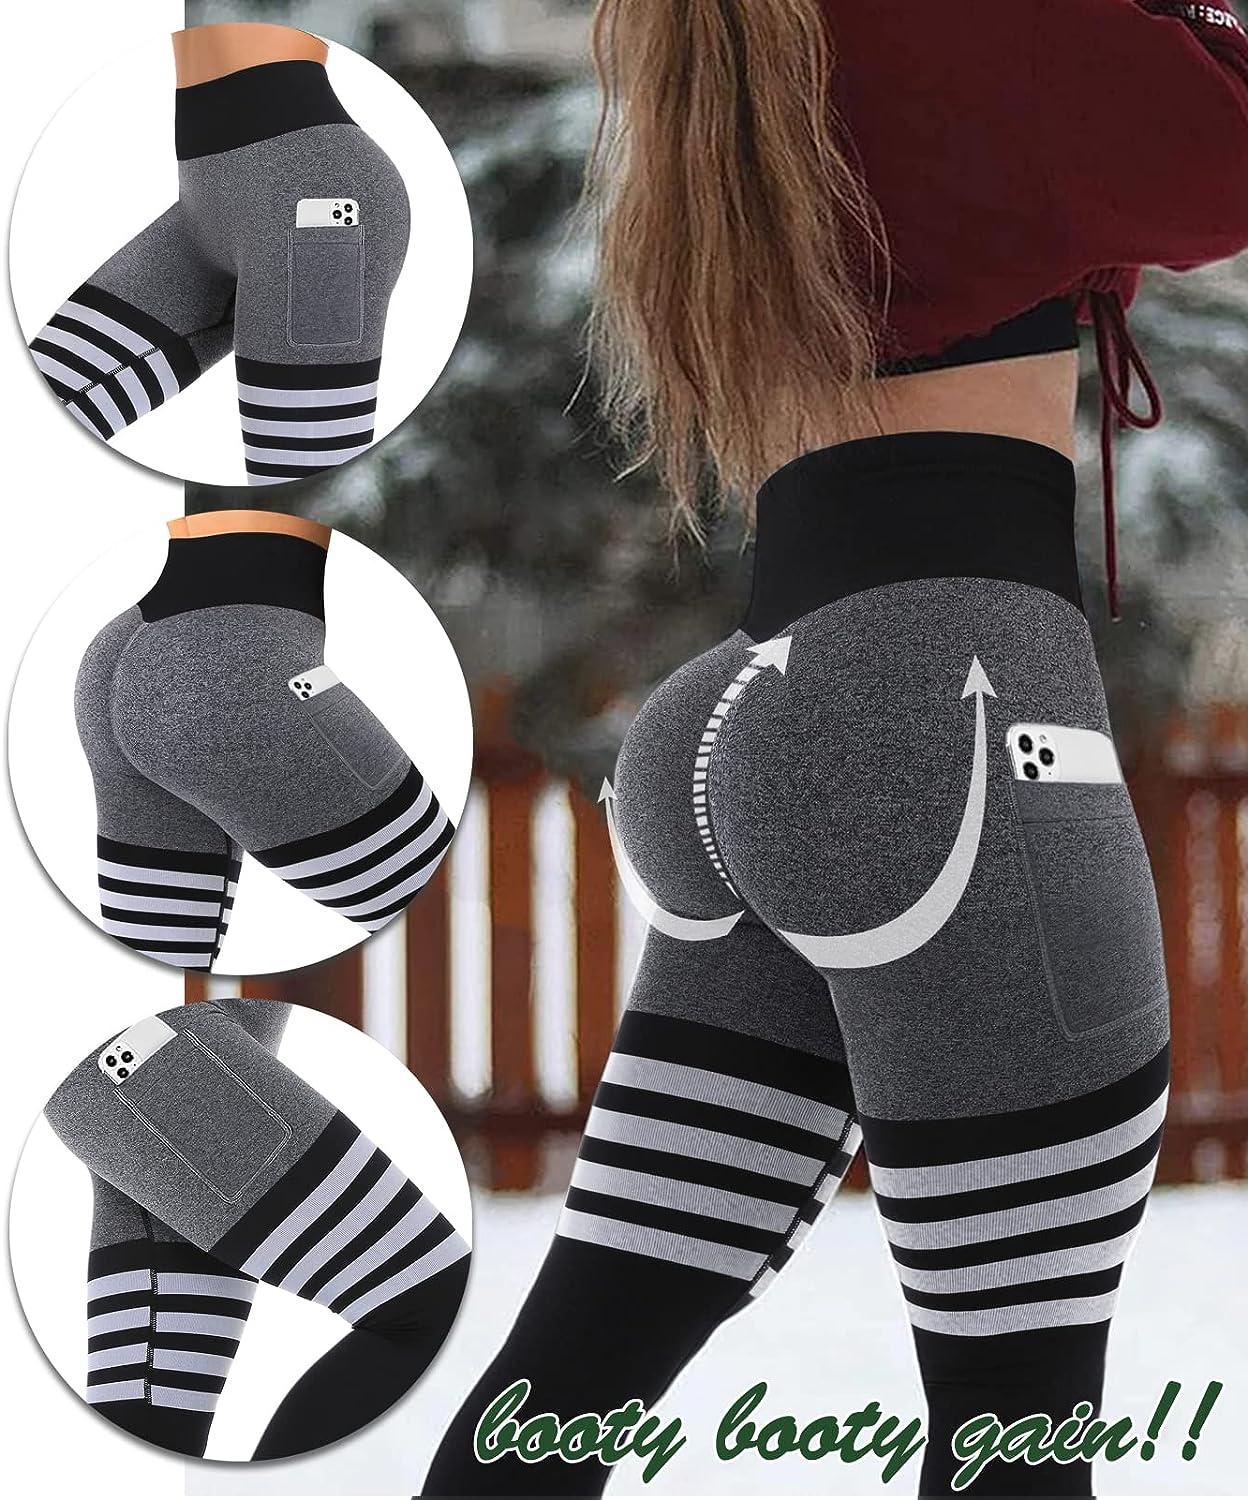 Seamless Yoga Pants Workout Leggings for Fitness -  Canada